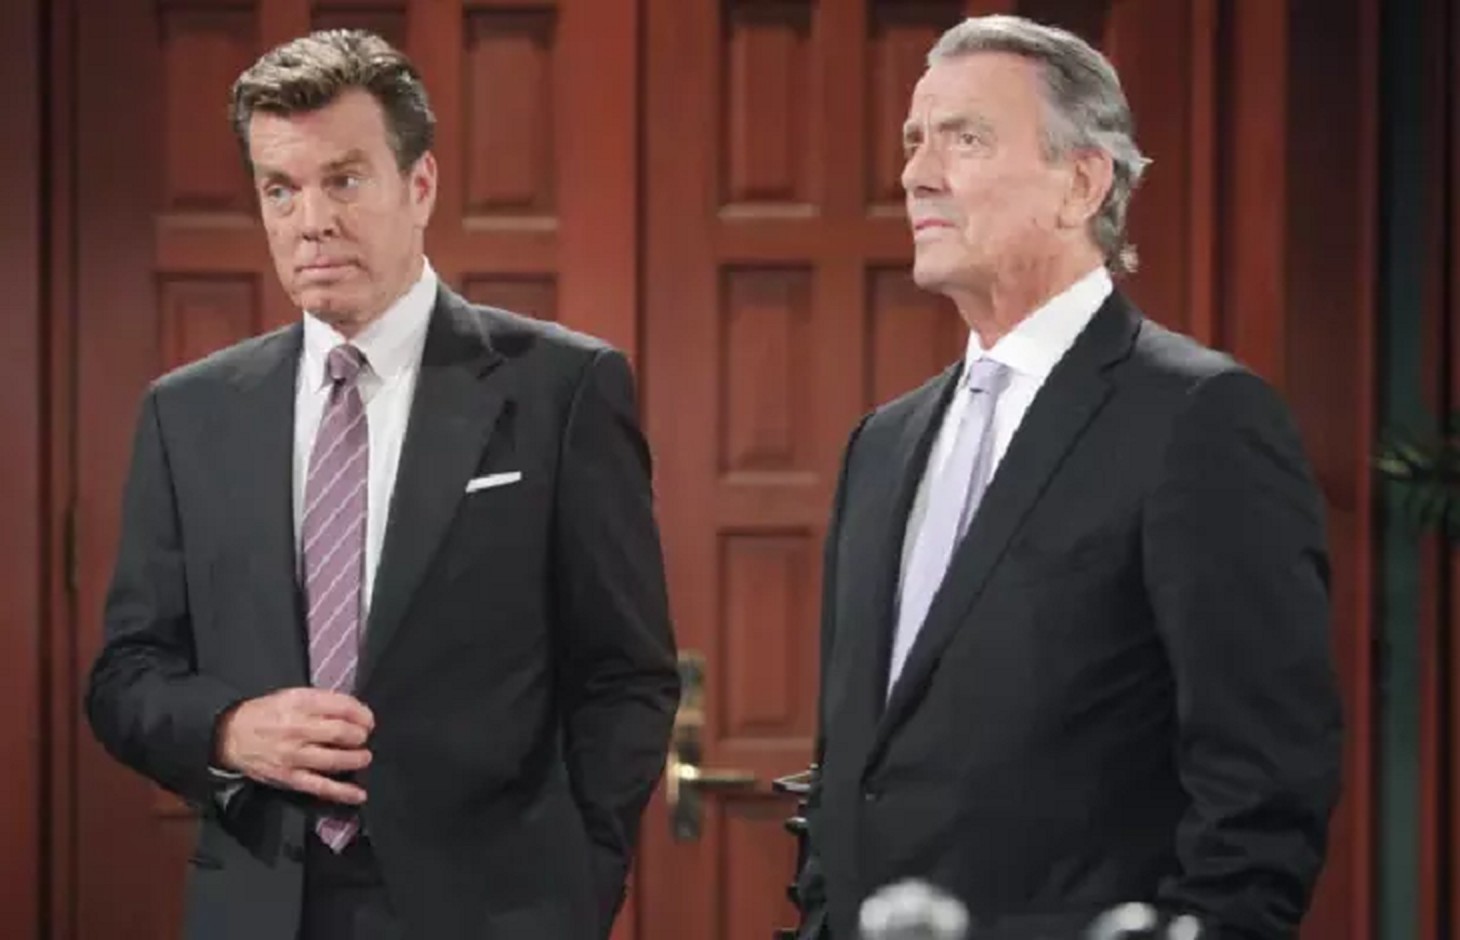 Y&R/Jack (Peter Bergman) and Victor (Eric Braeden) team up to take down Jeremy